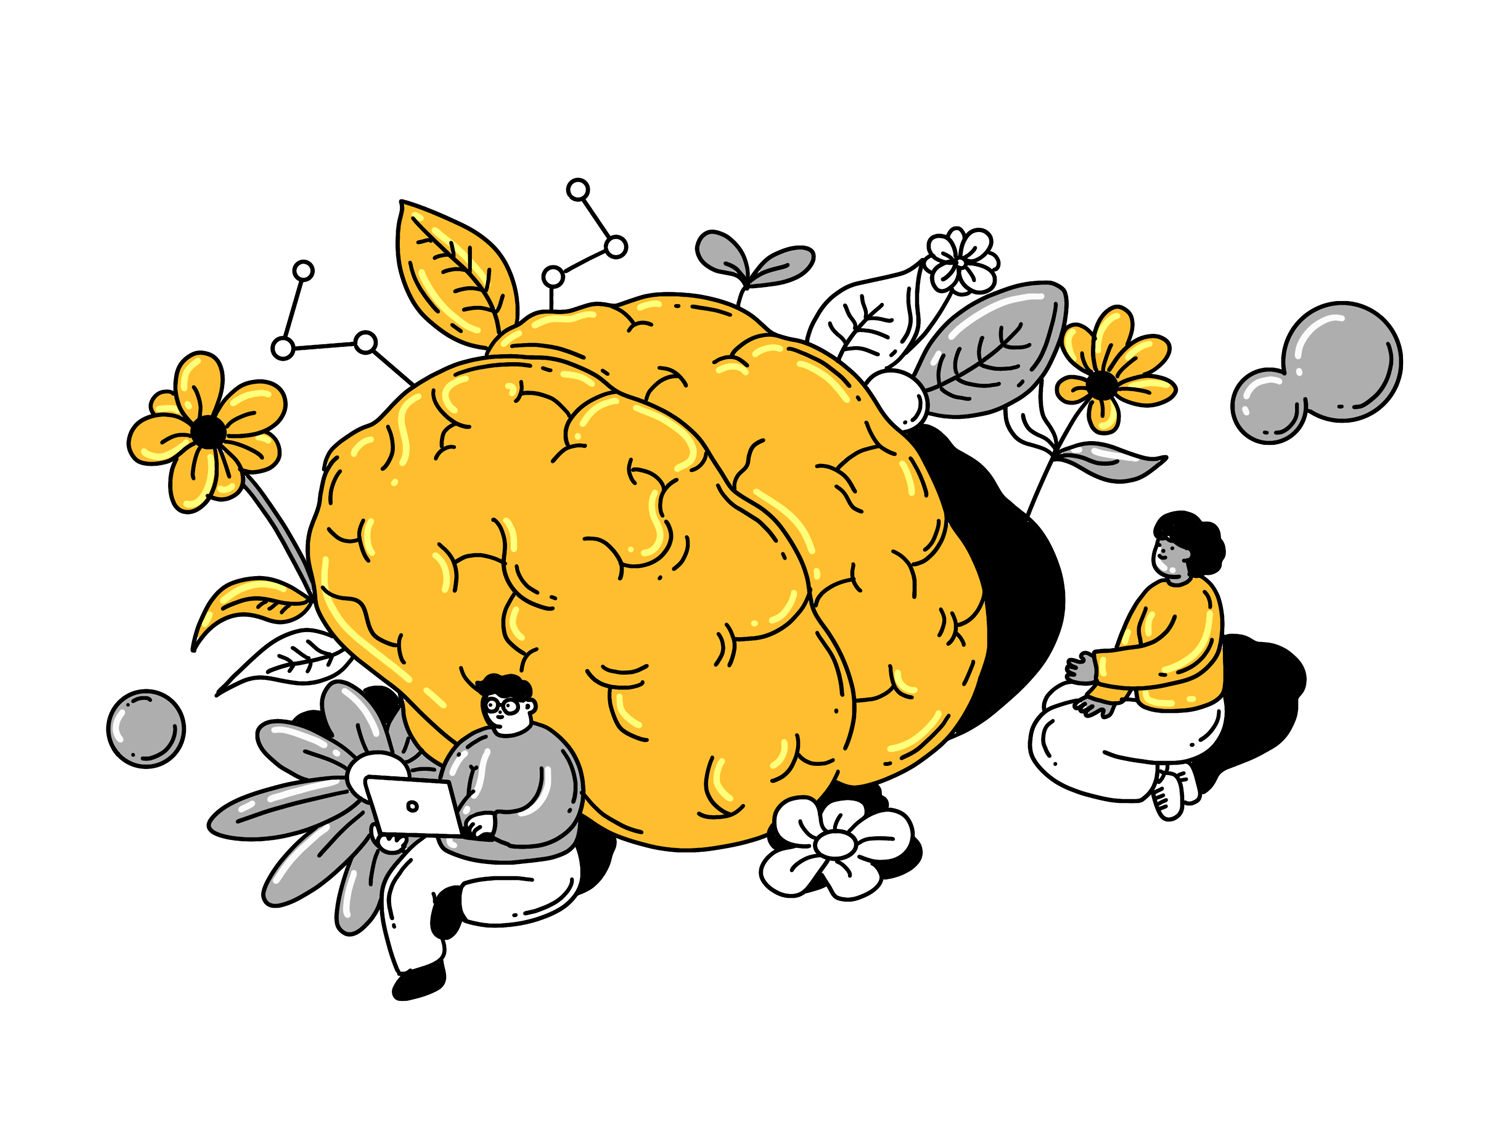 An illustration of a brain with flowers growing around it